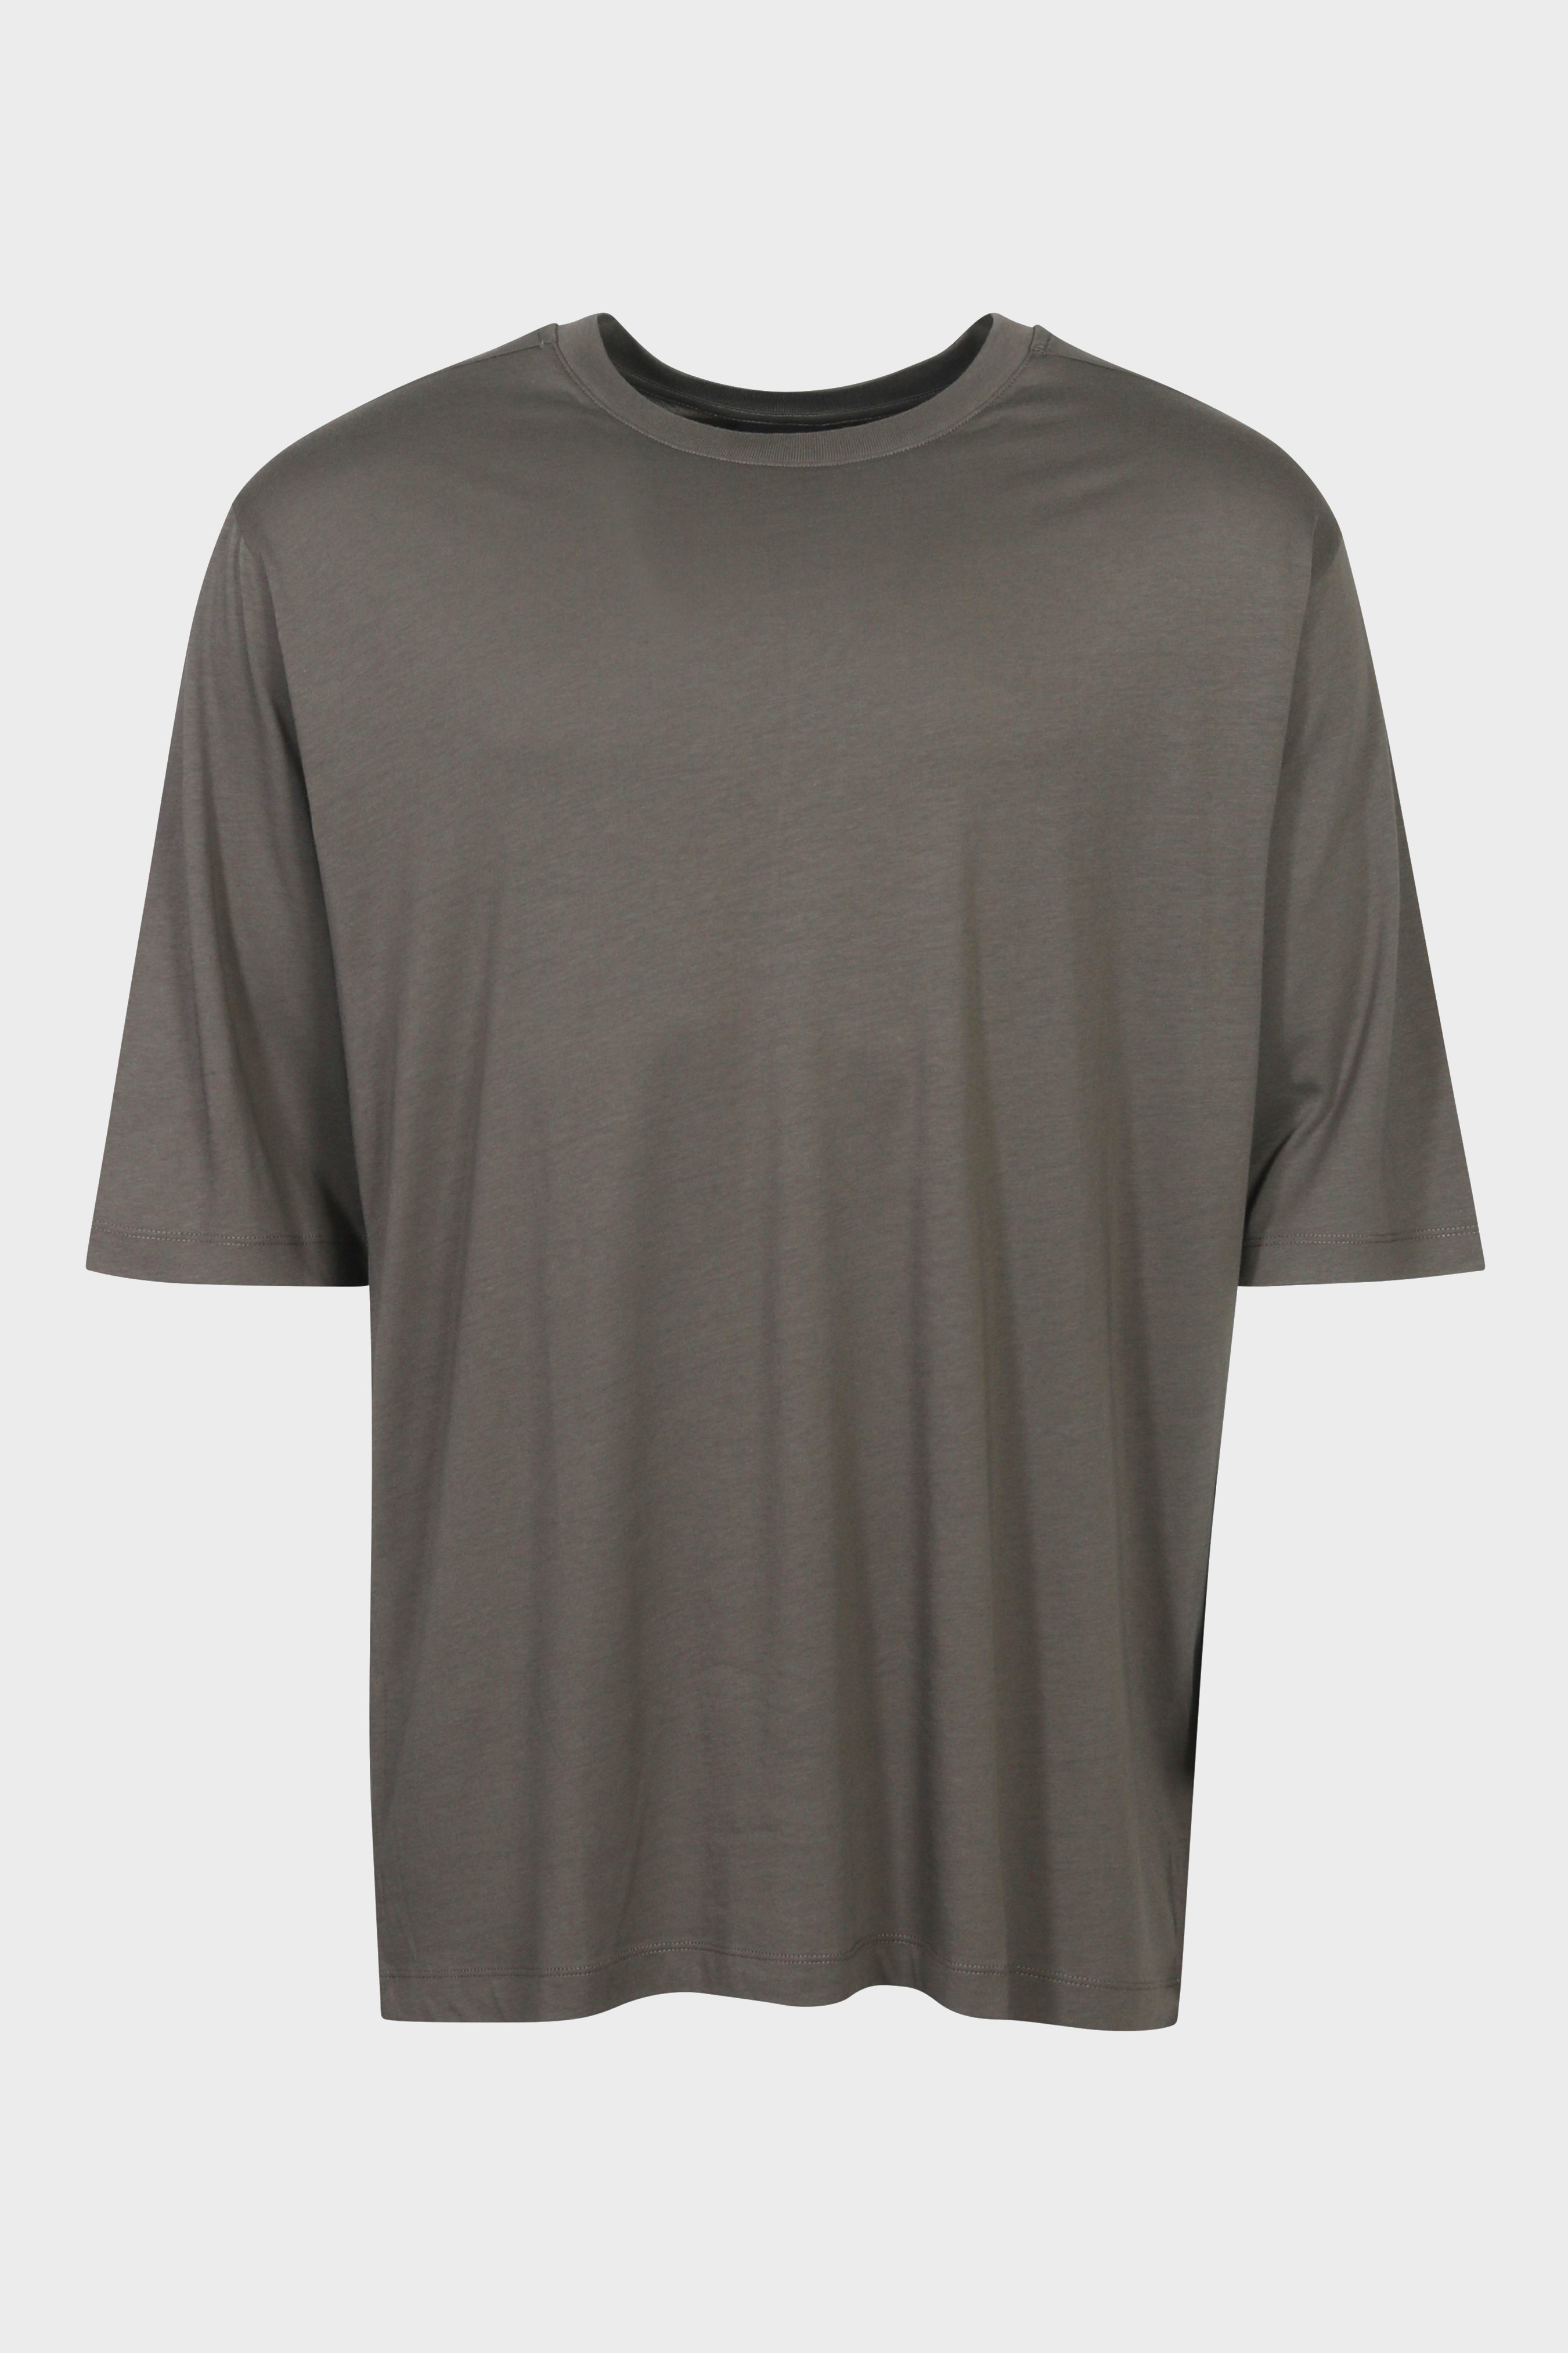 THOM KROM Oversize T-Shirt in Ivy Green S